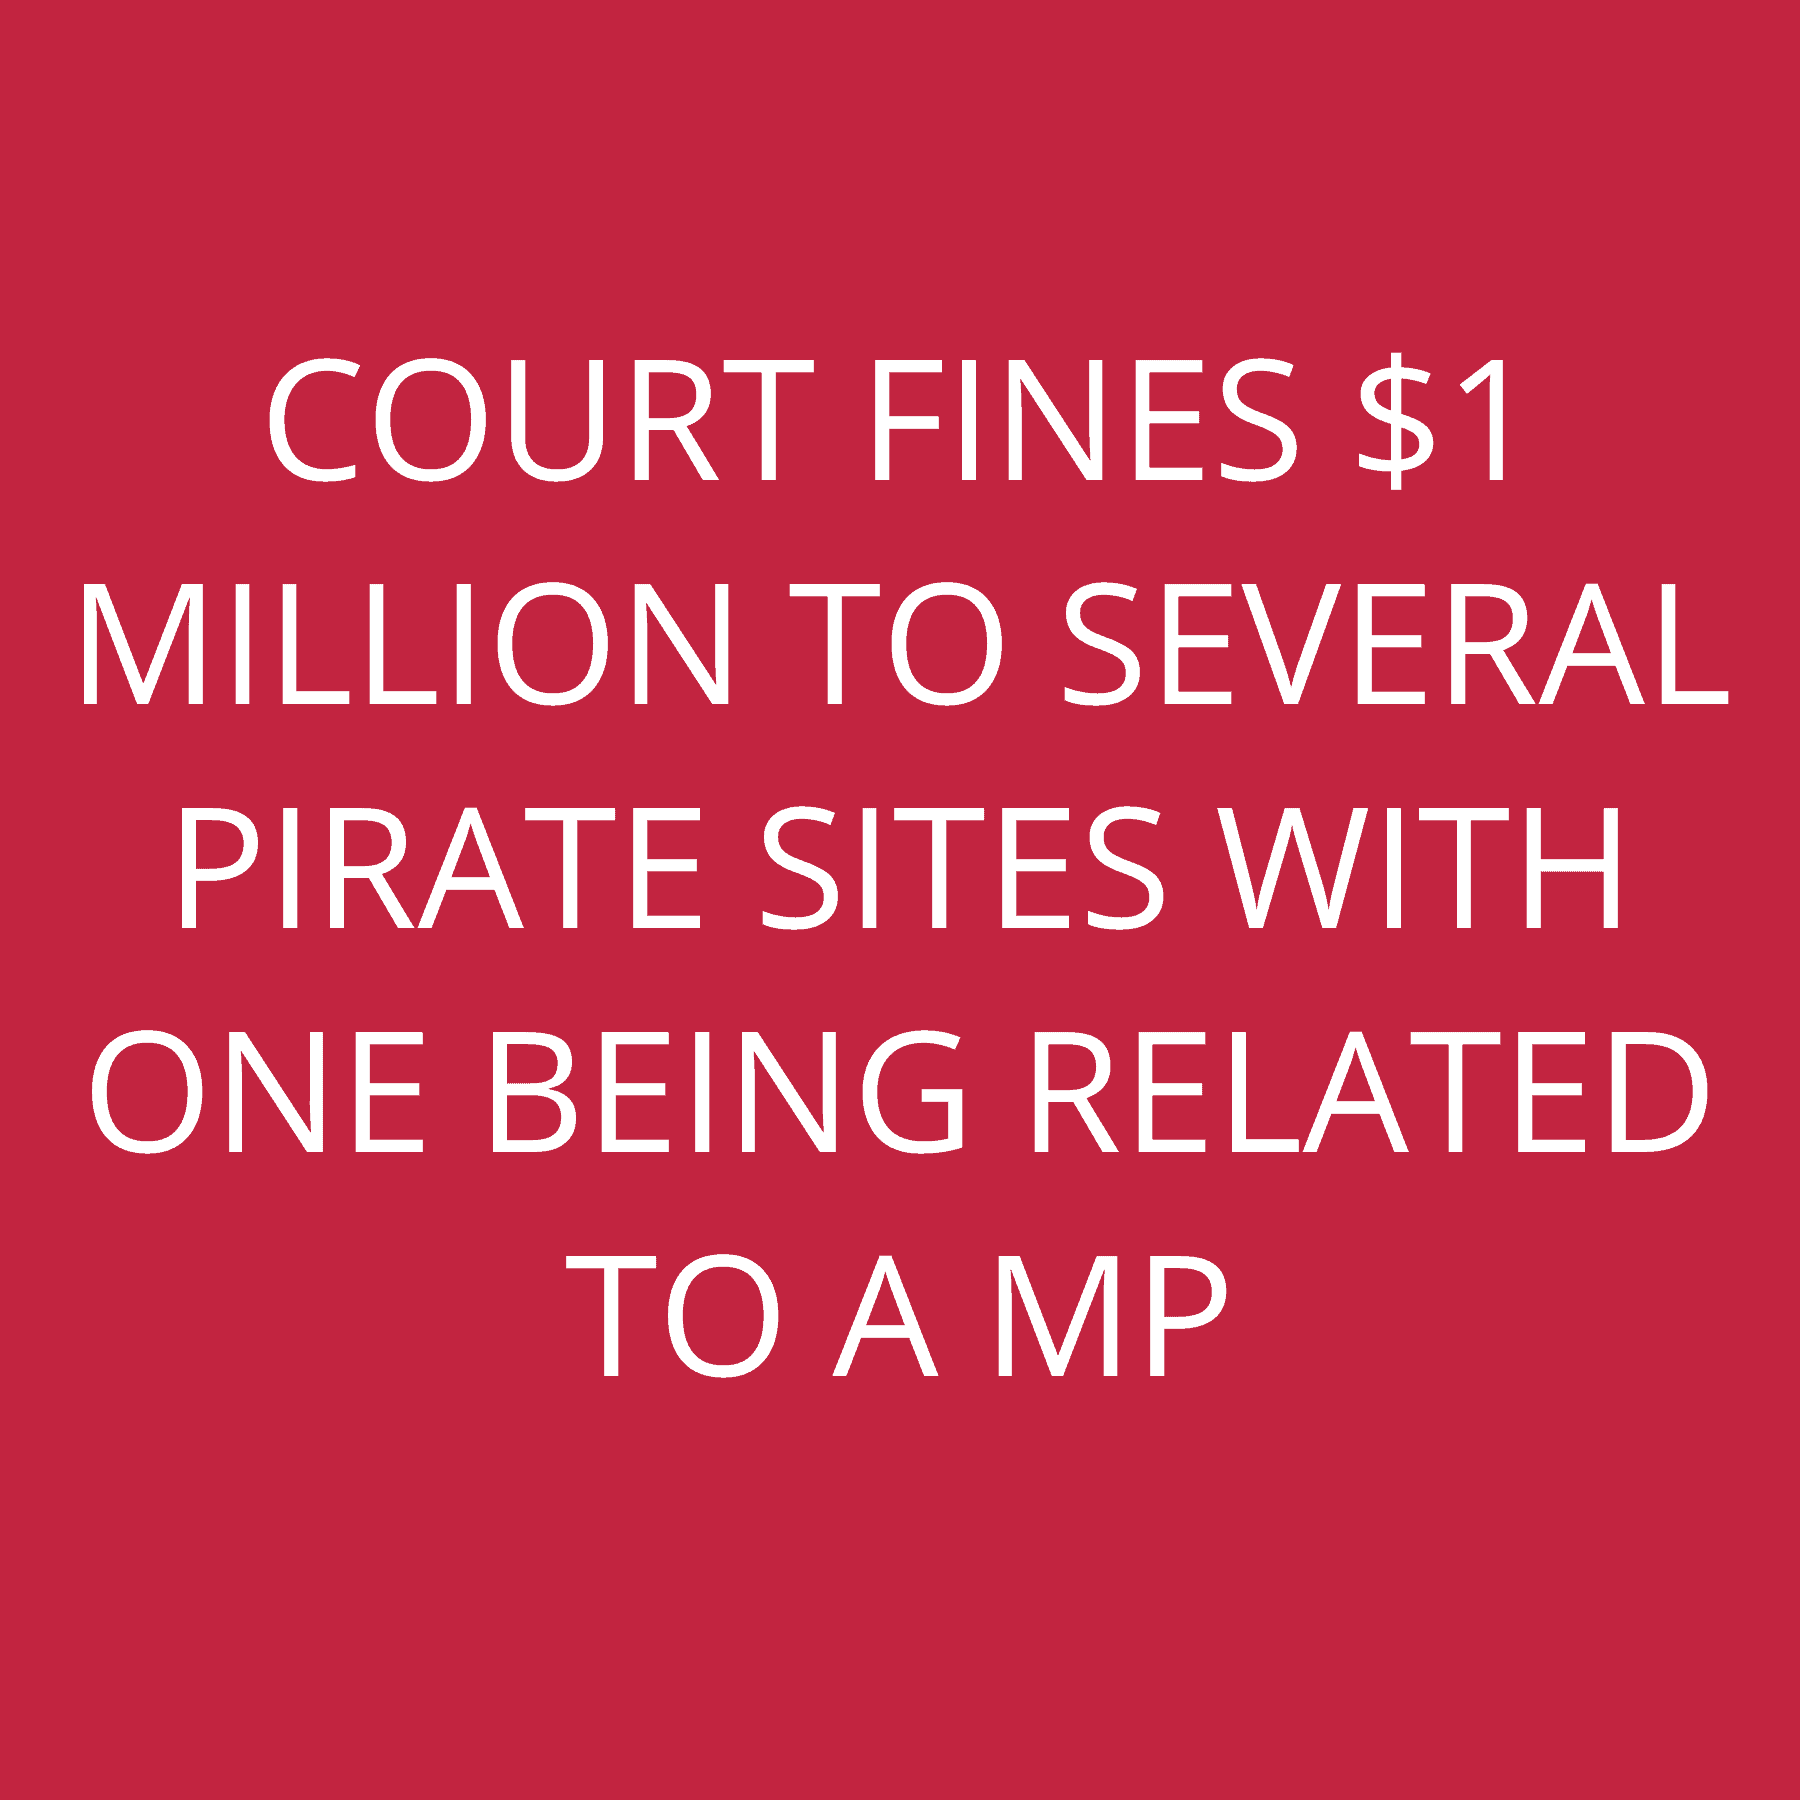 Court fines $1 million to several pirate sites with one being related to a MP